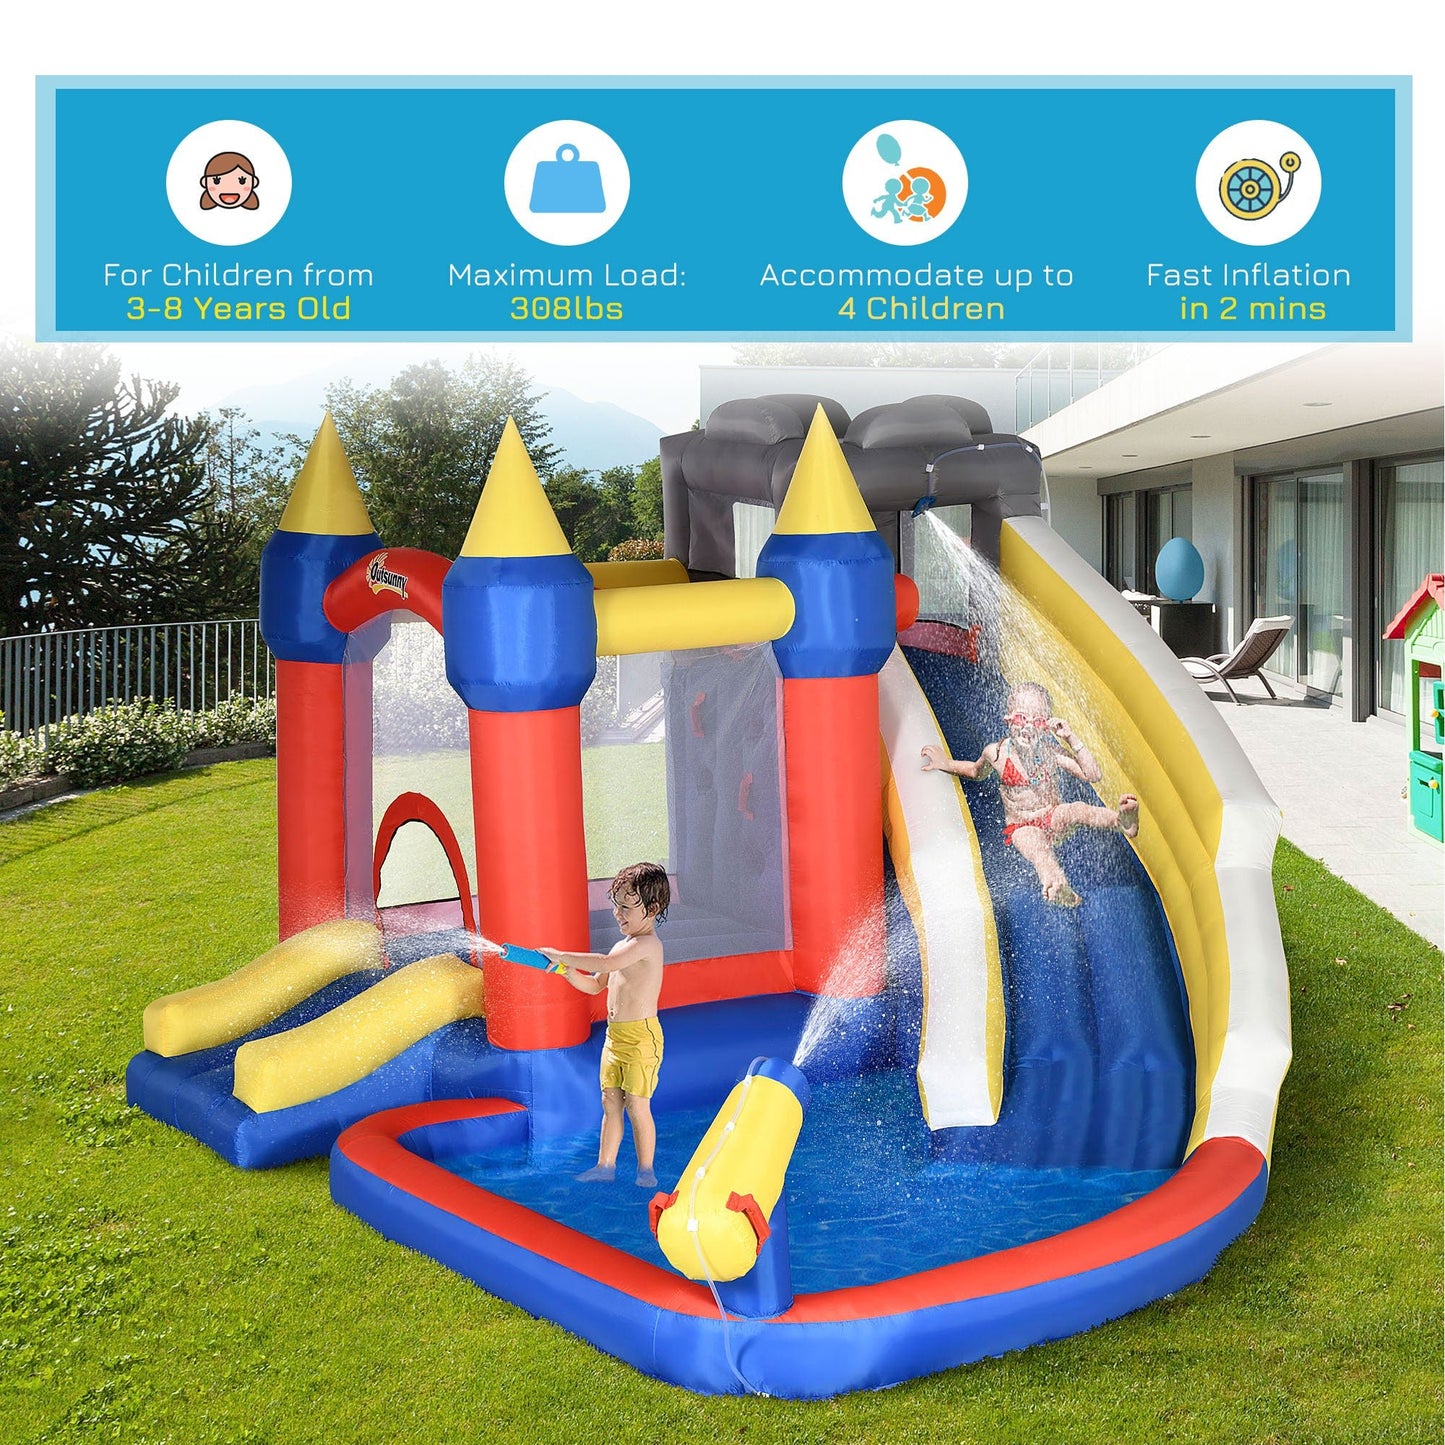 Miscellaneous-6-in-1 Inflatable Water Slide, Kids Castle Bounce House Includes Slide, Trampoline. Basket, Pool, Water Gun, Climbing Wall - Outdoor Style Company